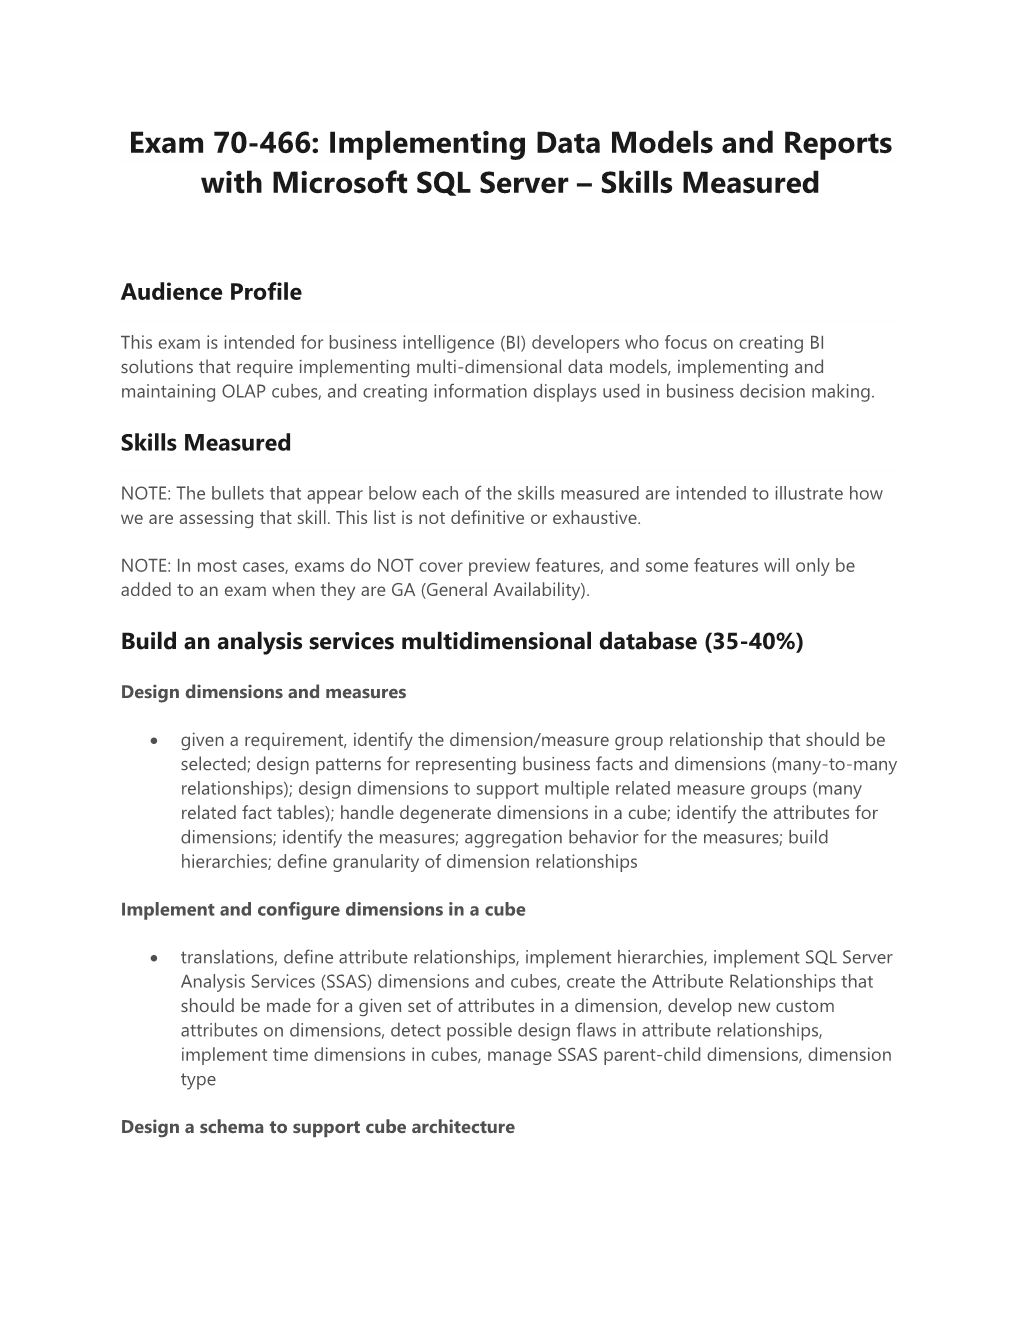 Implementing Data Models and Reports with Microsoft SQL Server – Skills Measured